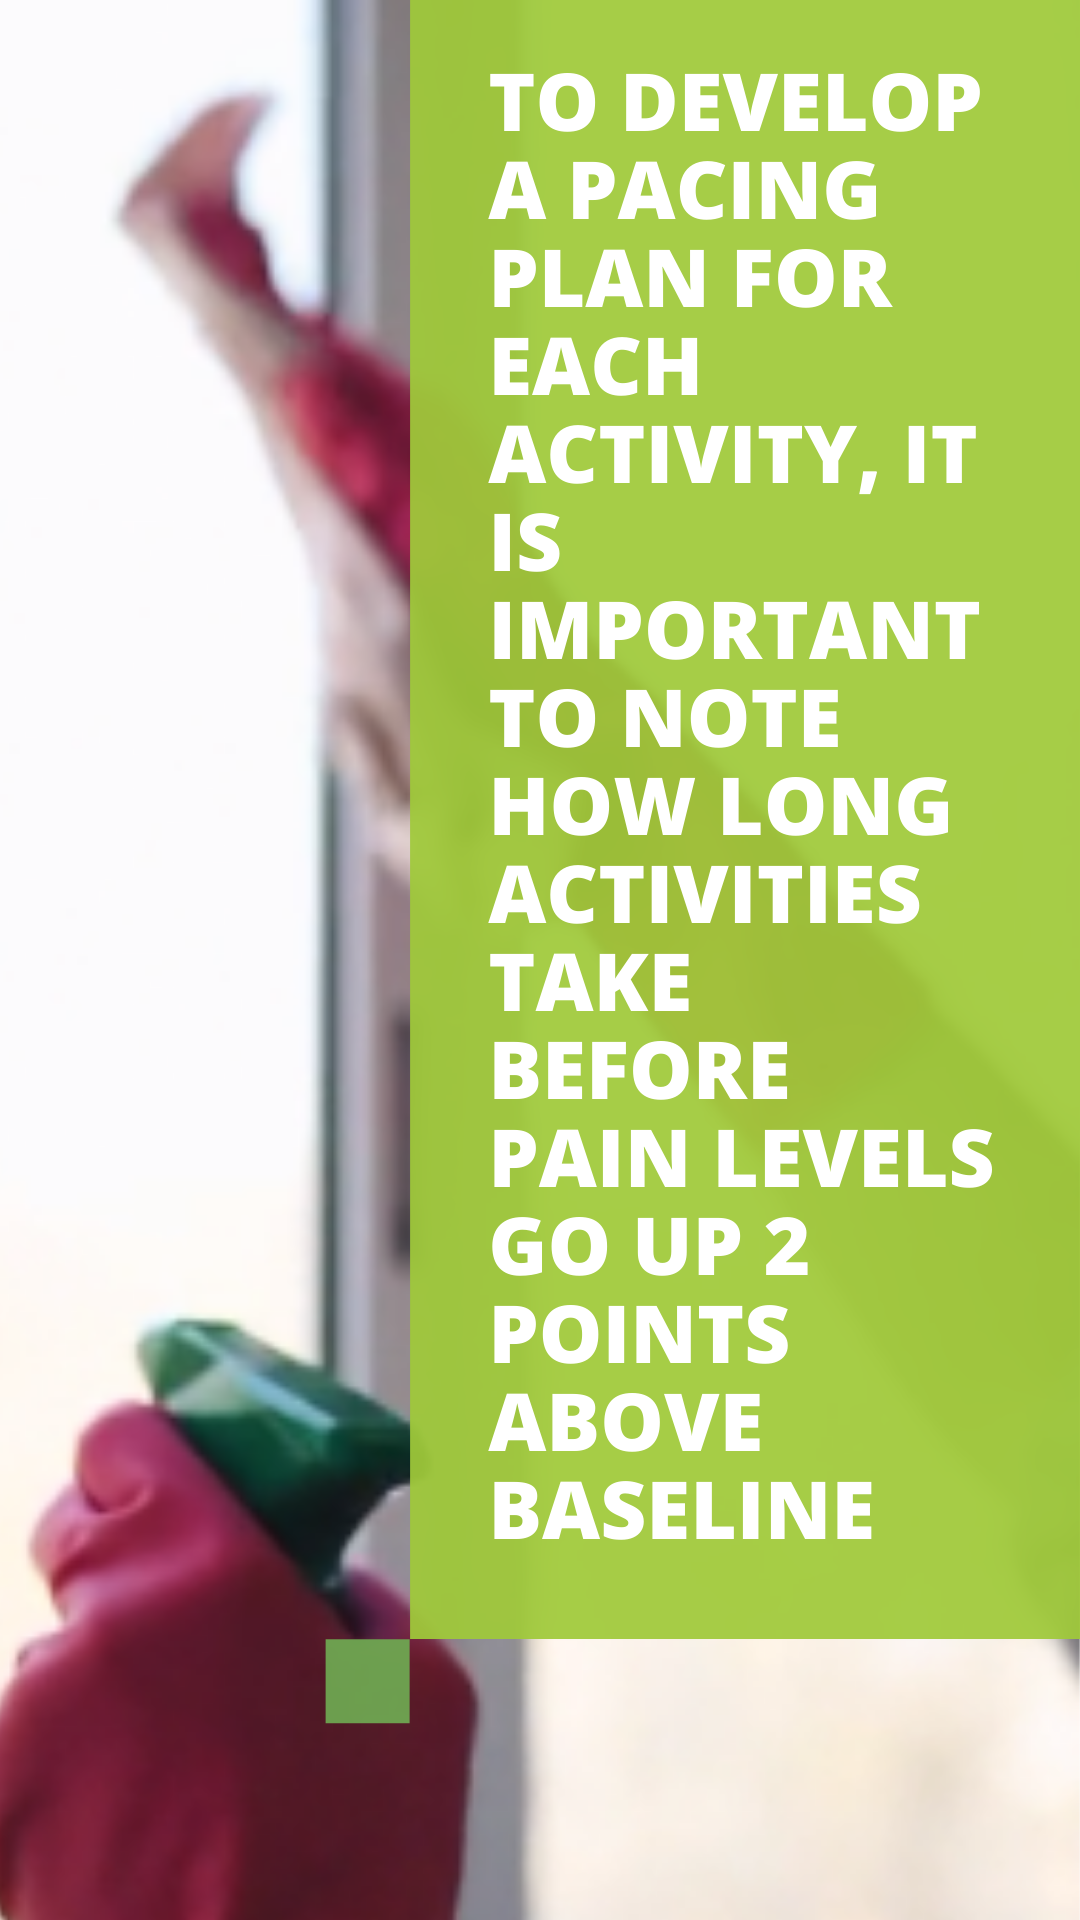 To develop a pacing plan for each activity it is important to note how long activities take before pain levels go up 2 points above baseline.